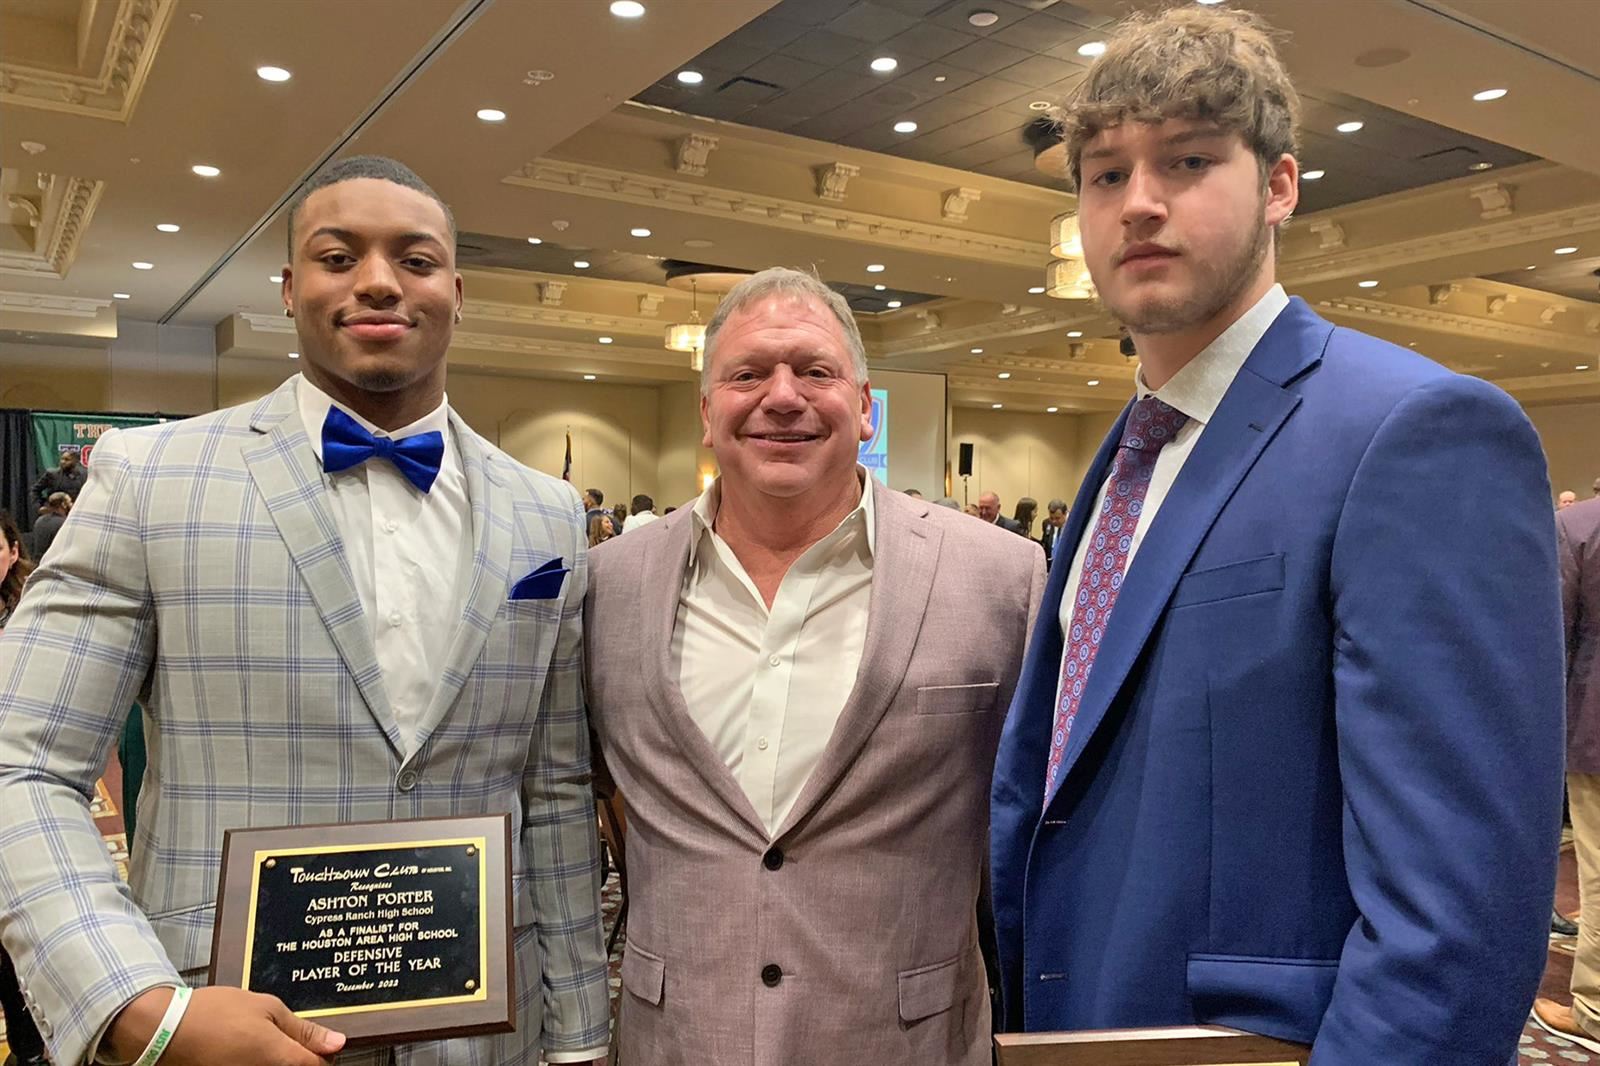 CFISD football standouts, coach honored as TD Club award finalists.